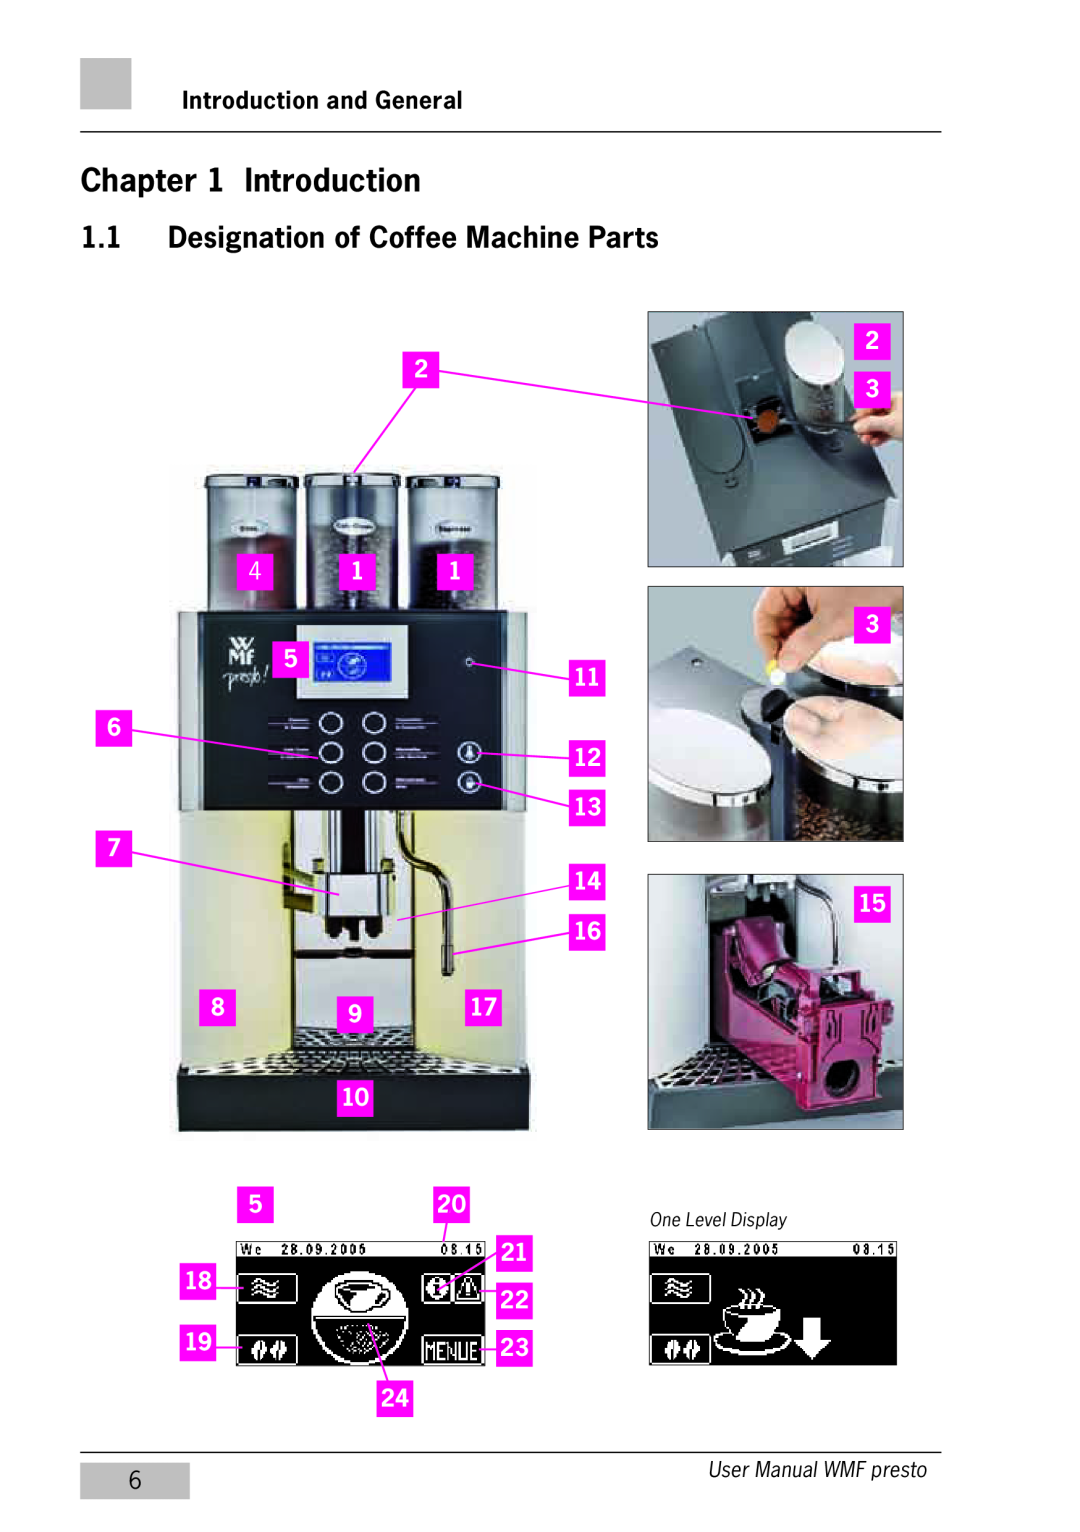 WMF Americas 1400 user manual Designation of Coffee Machine Parts, Introduction and General, One Level Display 